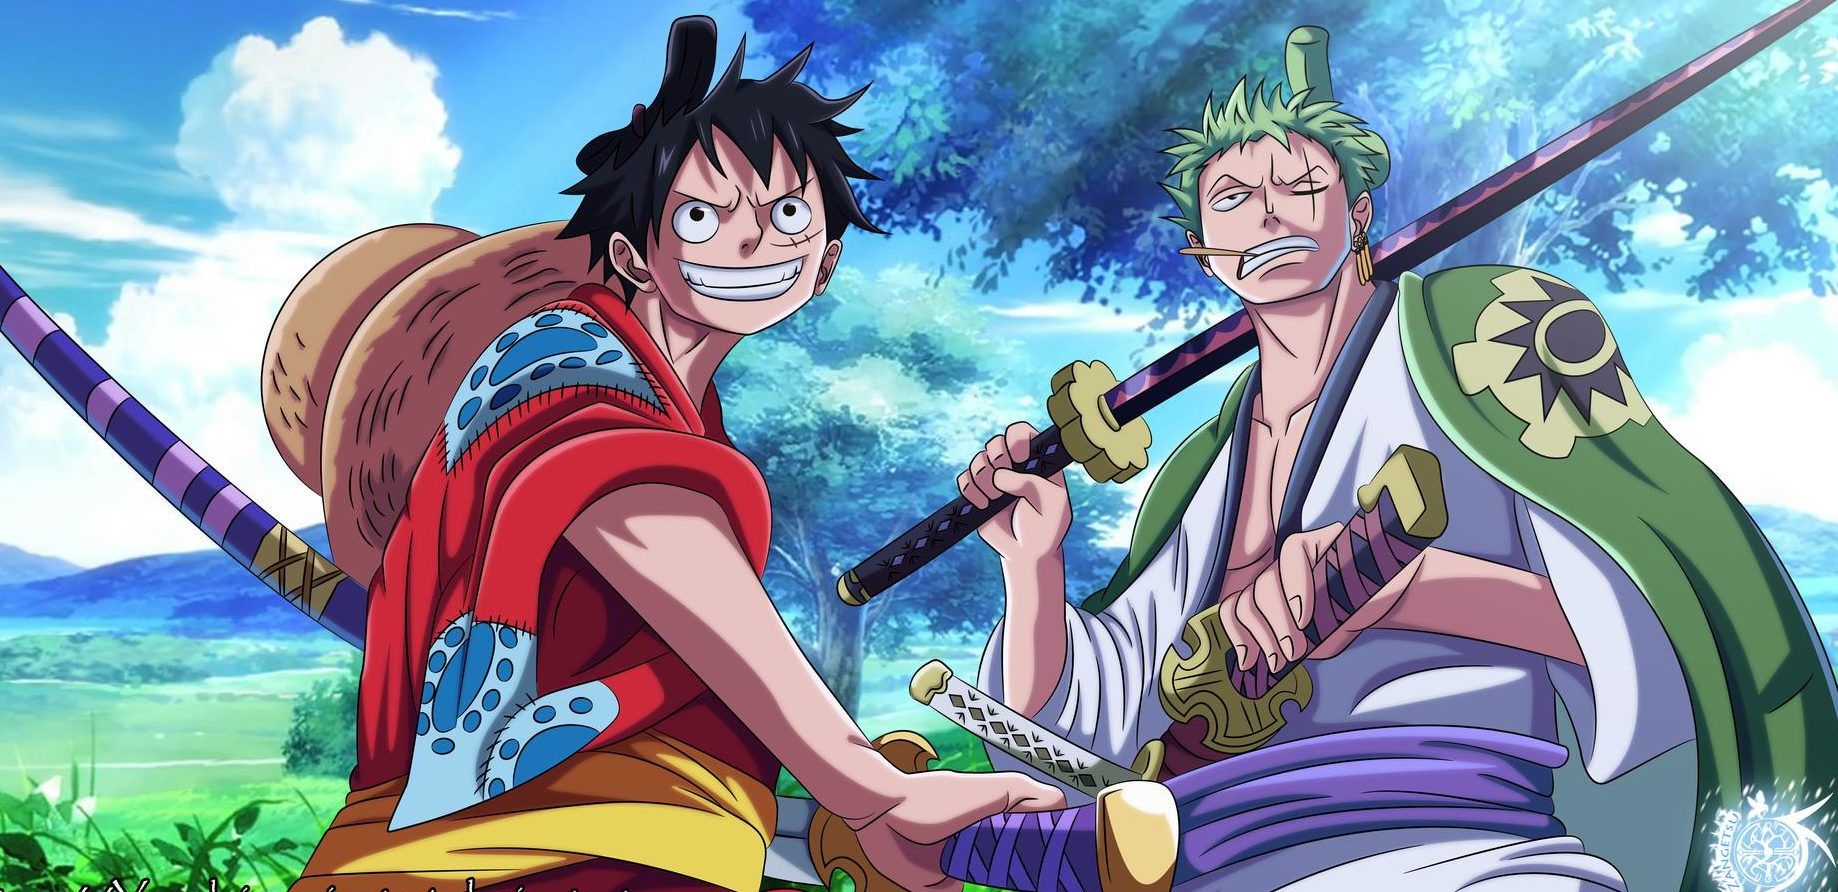 Iphone One Piece Wano Wallpapers Hd.